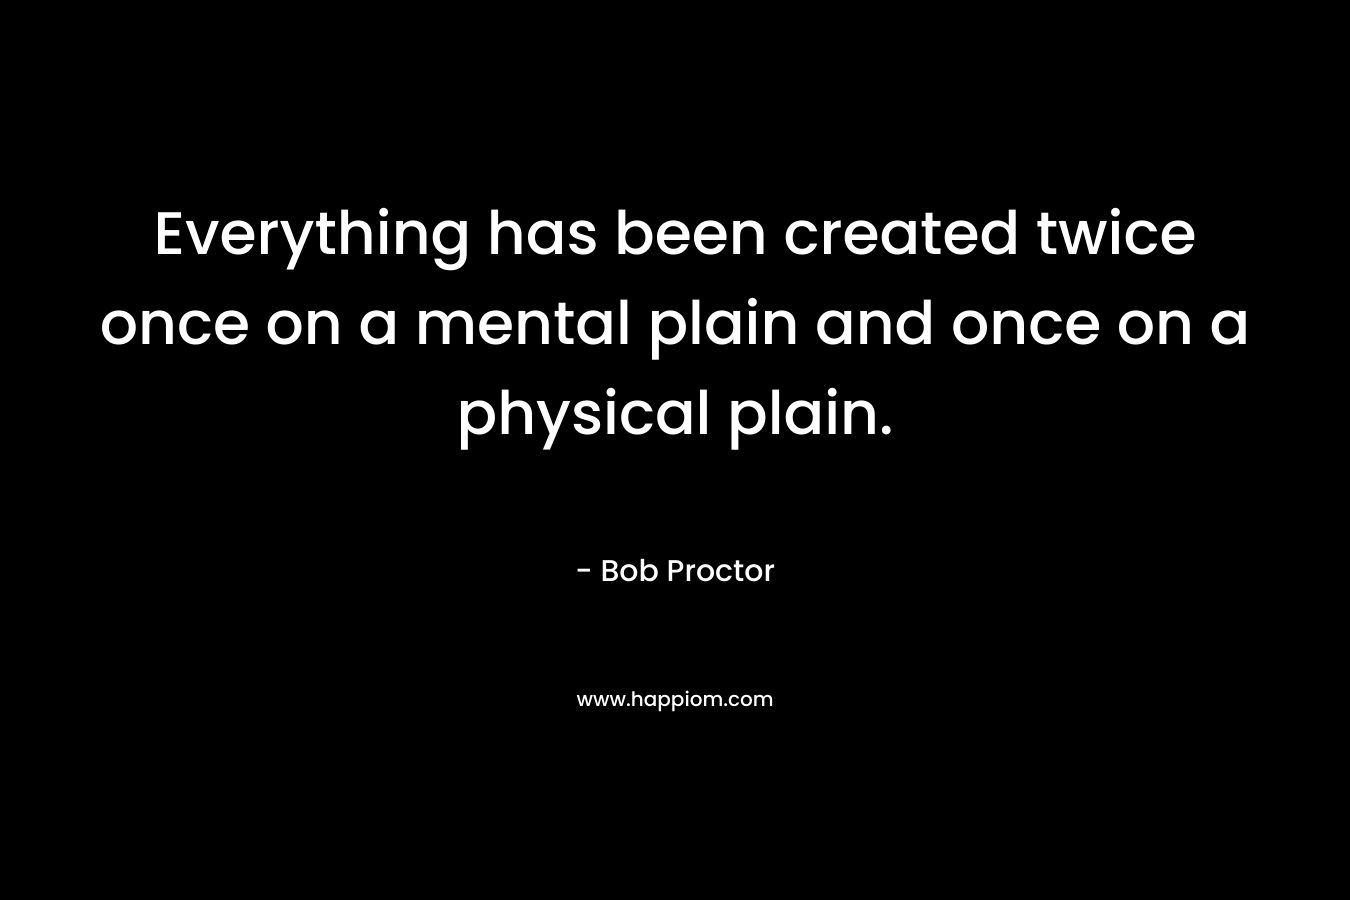 Everything has been created twice once on a mental plain and once on a physical plain.